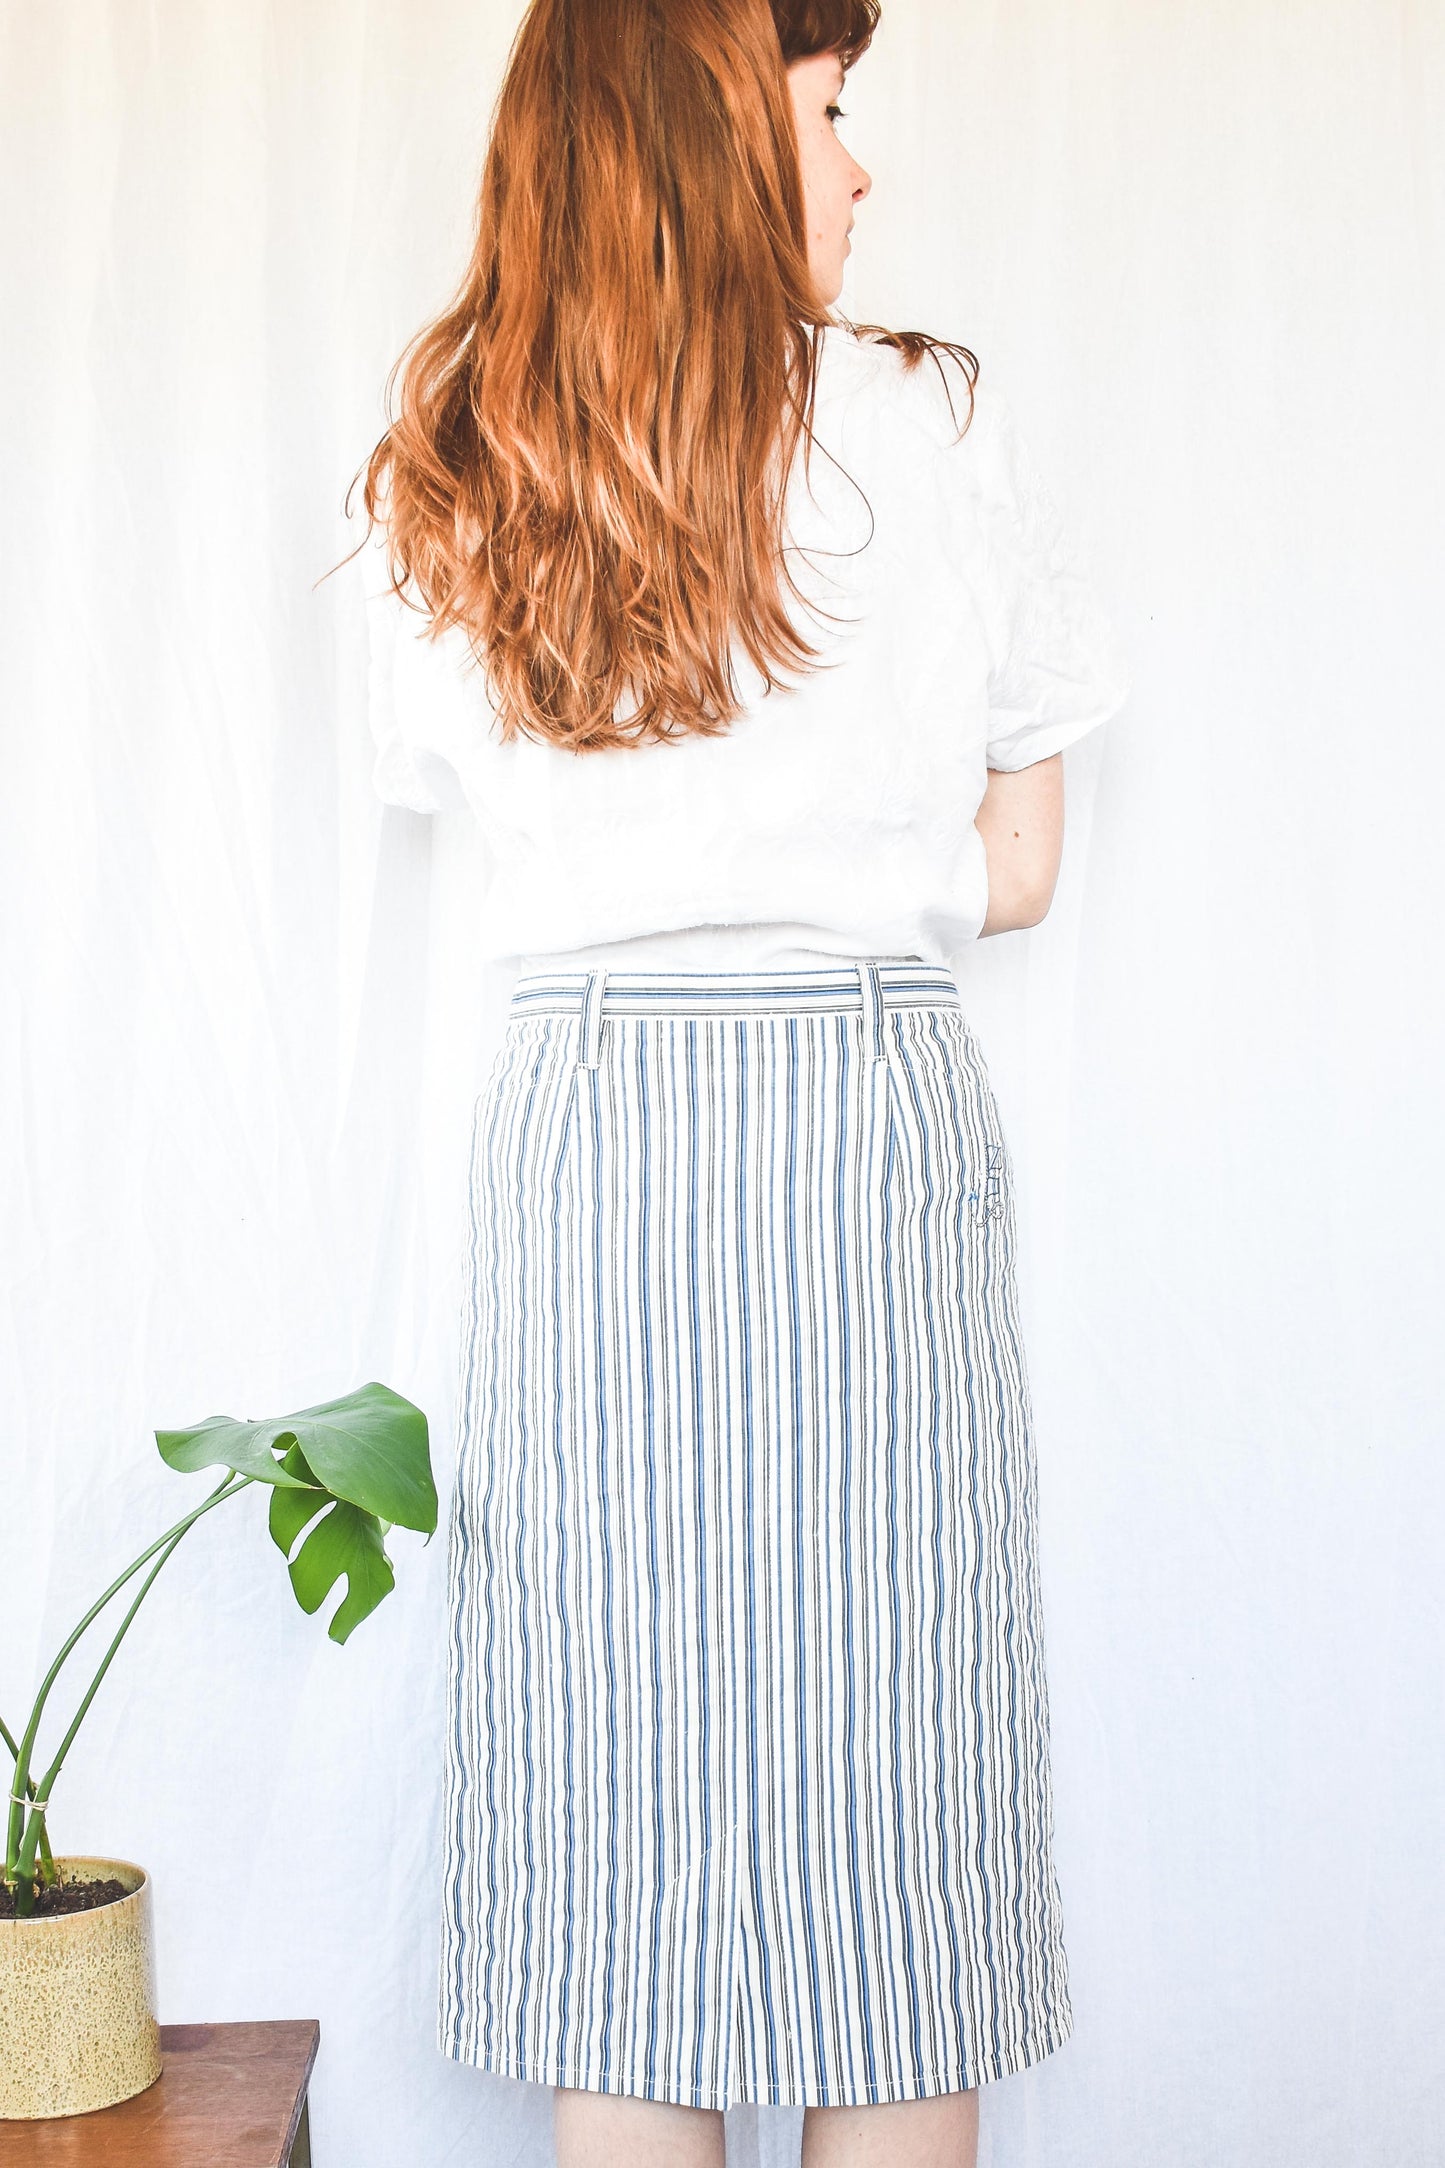 NEW IN! Striped skirt